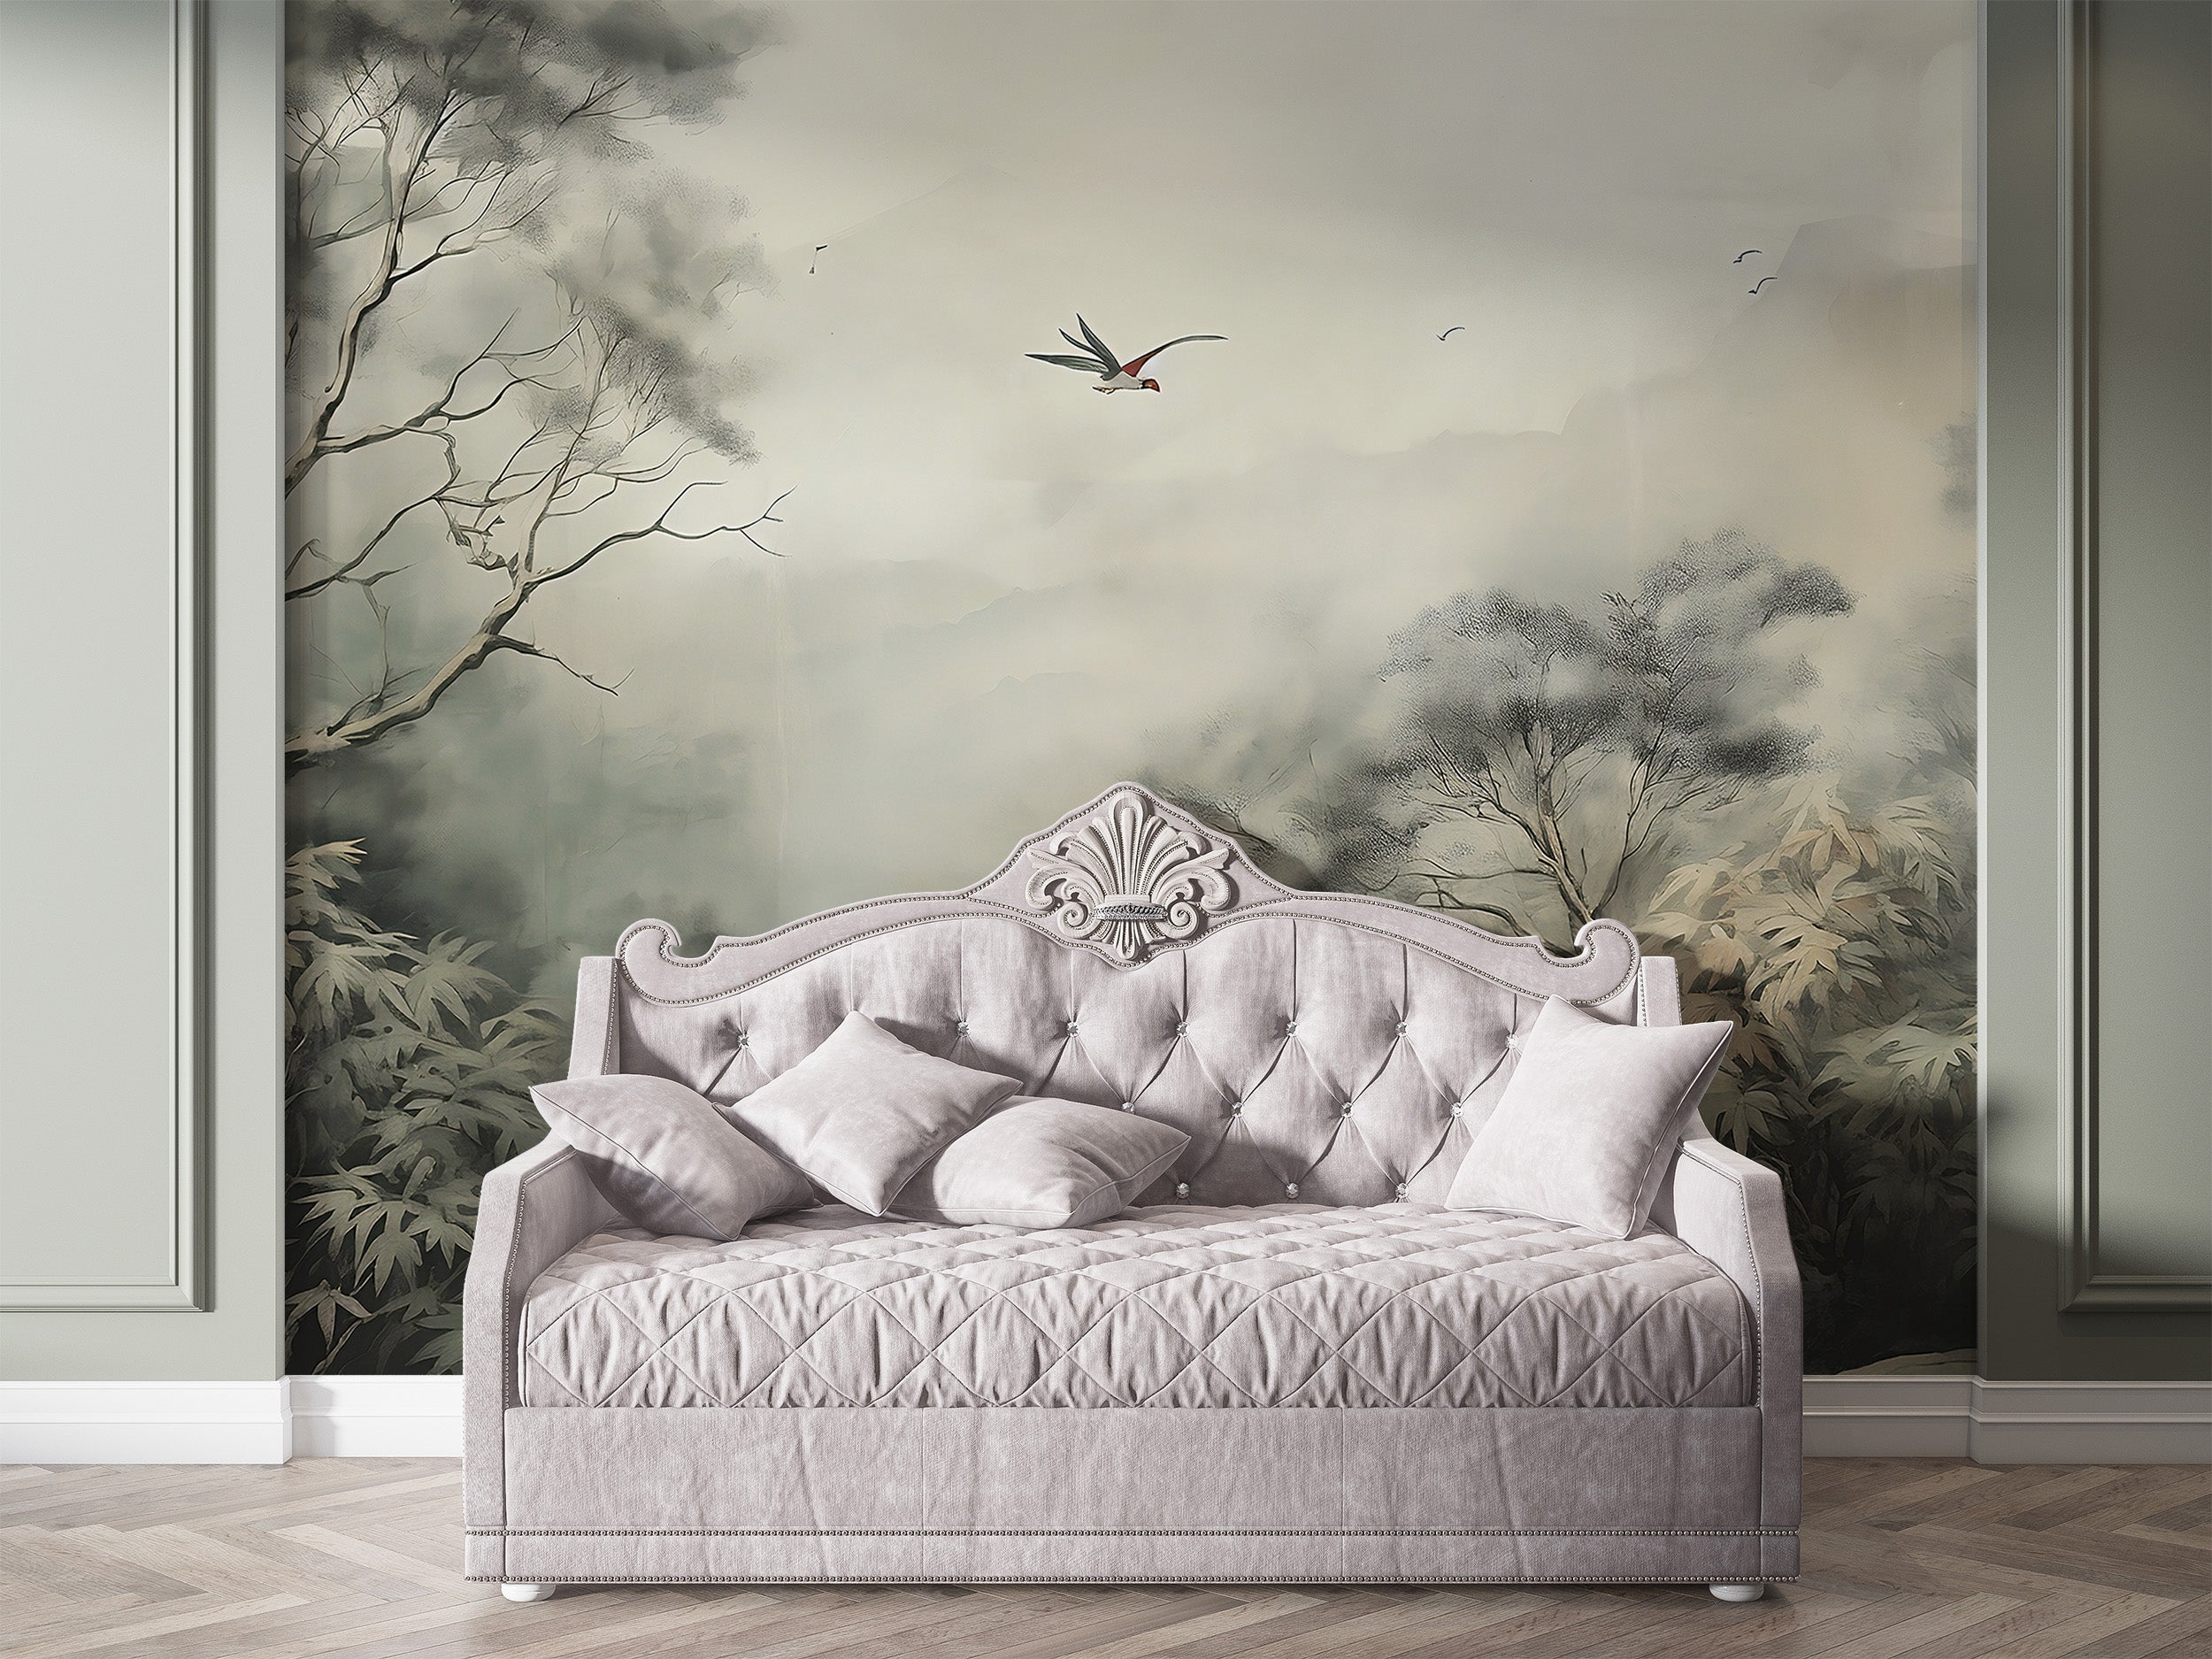 Classic Tropical Forest Mural in Monochrome Hues